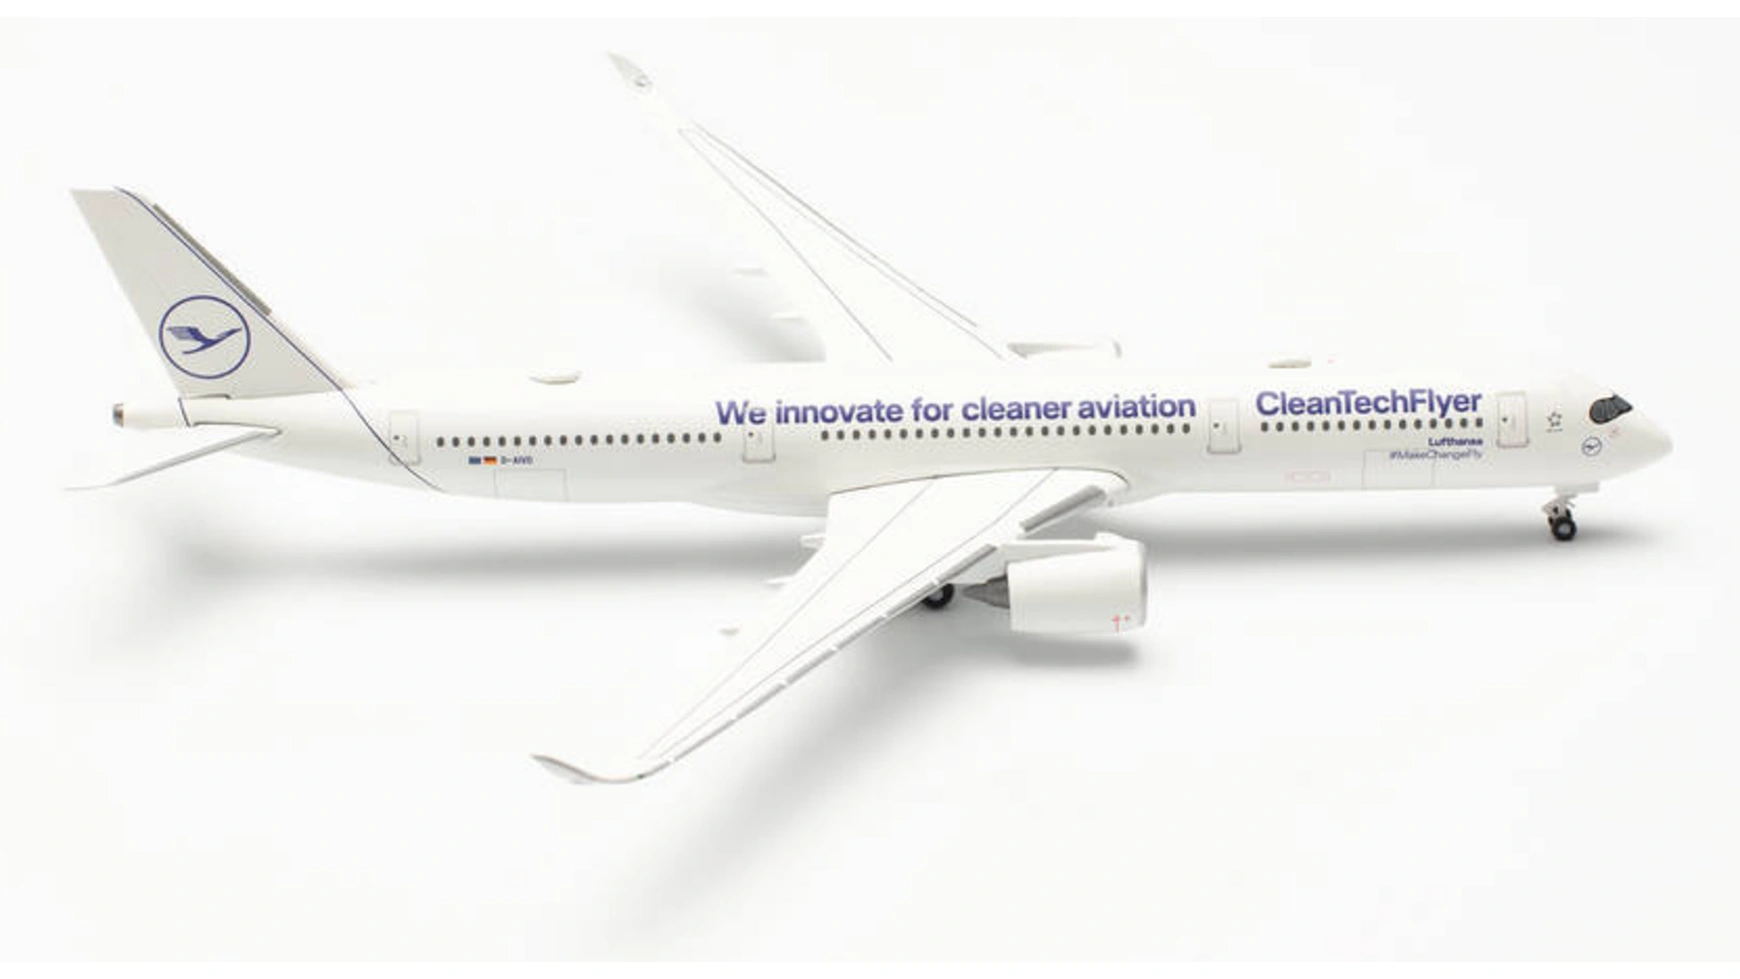 цена Wings 536653 lufthansa airbus a350-900 cleantechflyer d-aivd Herpa